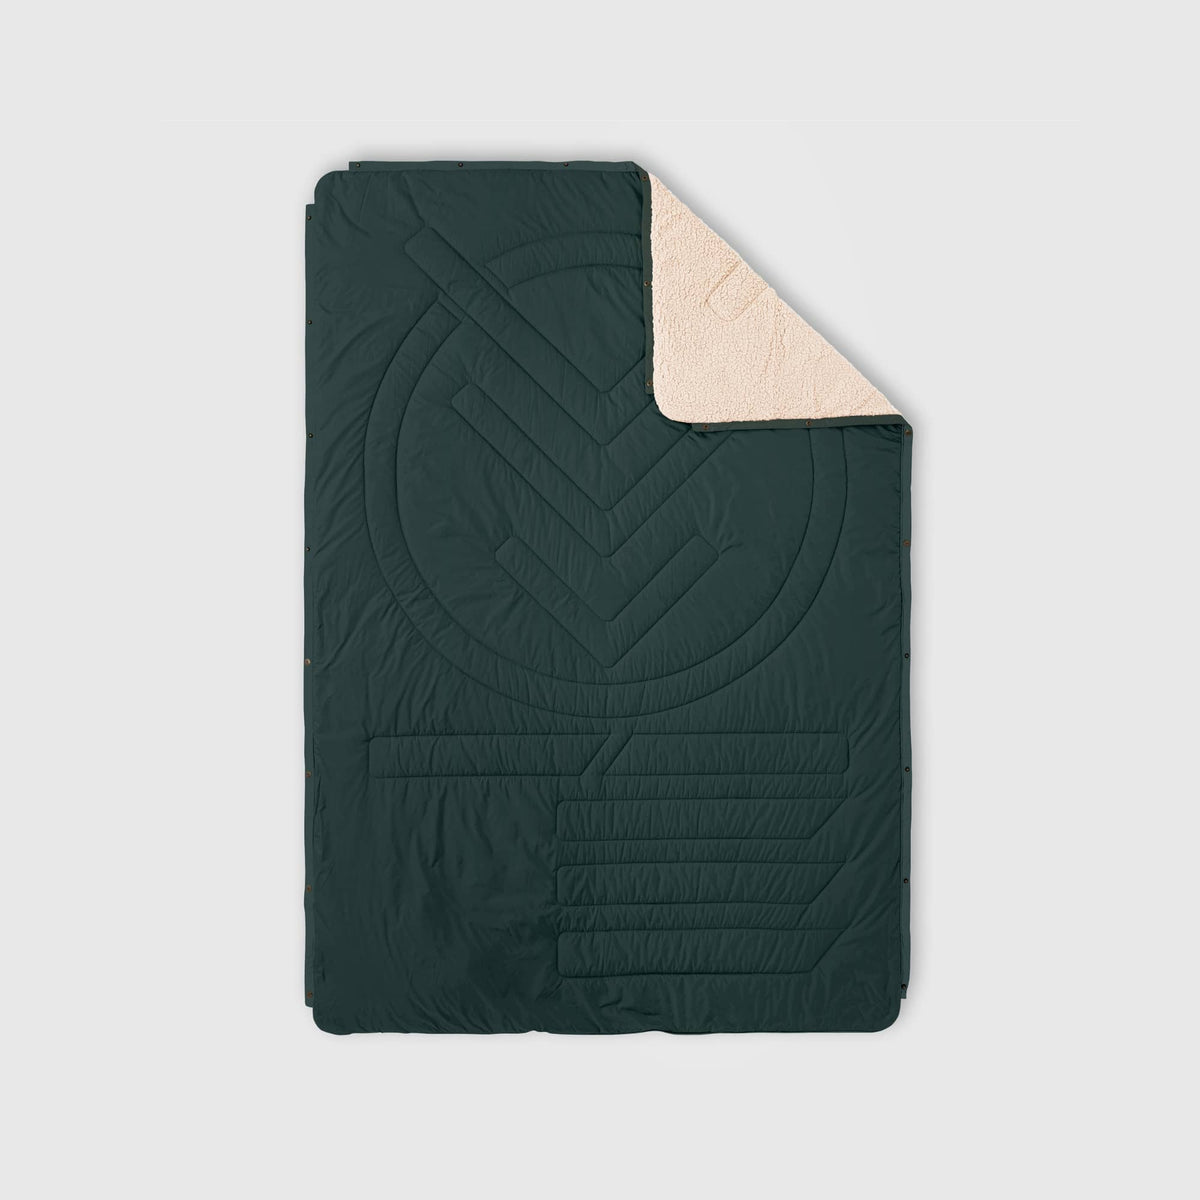 VOITED CloudTouch® Indoor/Outdoor Camping Blanket - Green Gabels Blankets VOITED 